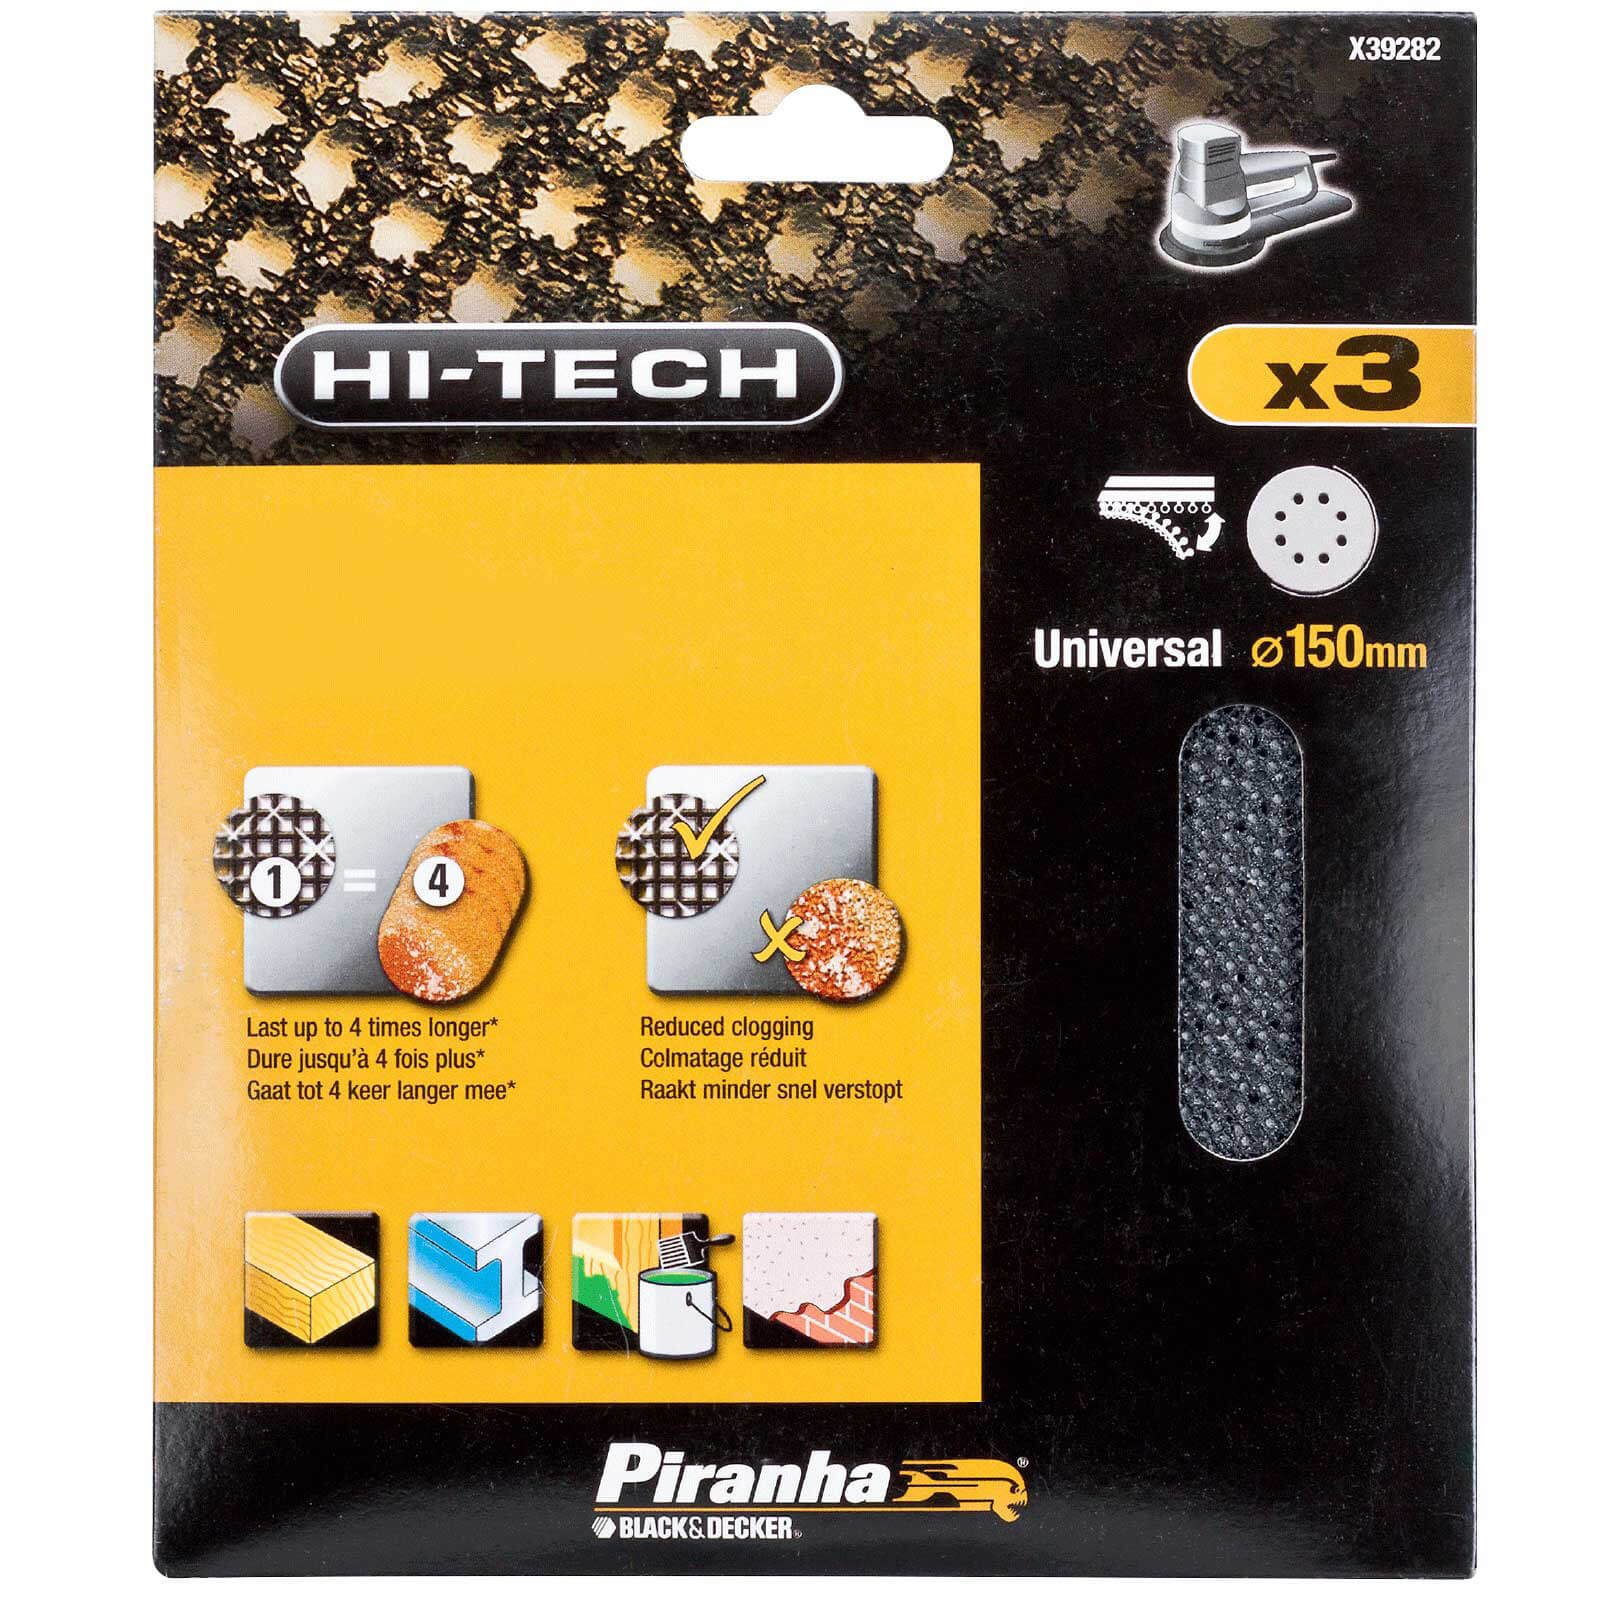 Image of Black and Decker Piranha Hi Tech Quick Fit Mesh ROS Sanding Sheets 150mm 150mm 120g Pack of 3